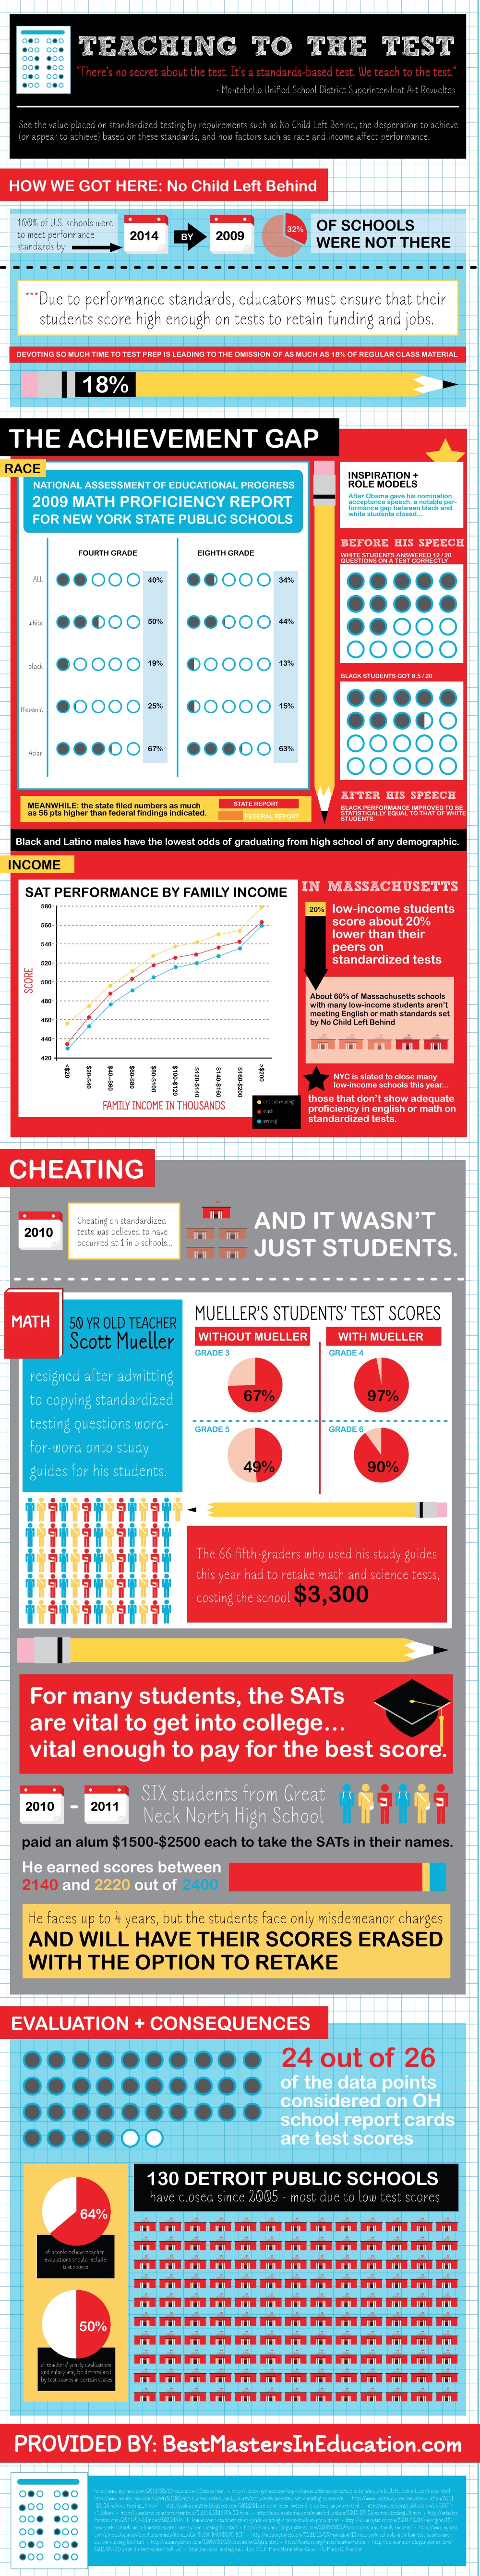 Teaching to the Test Infographic